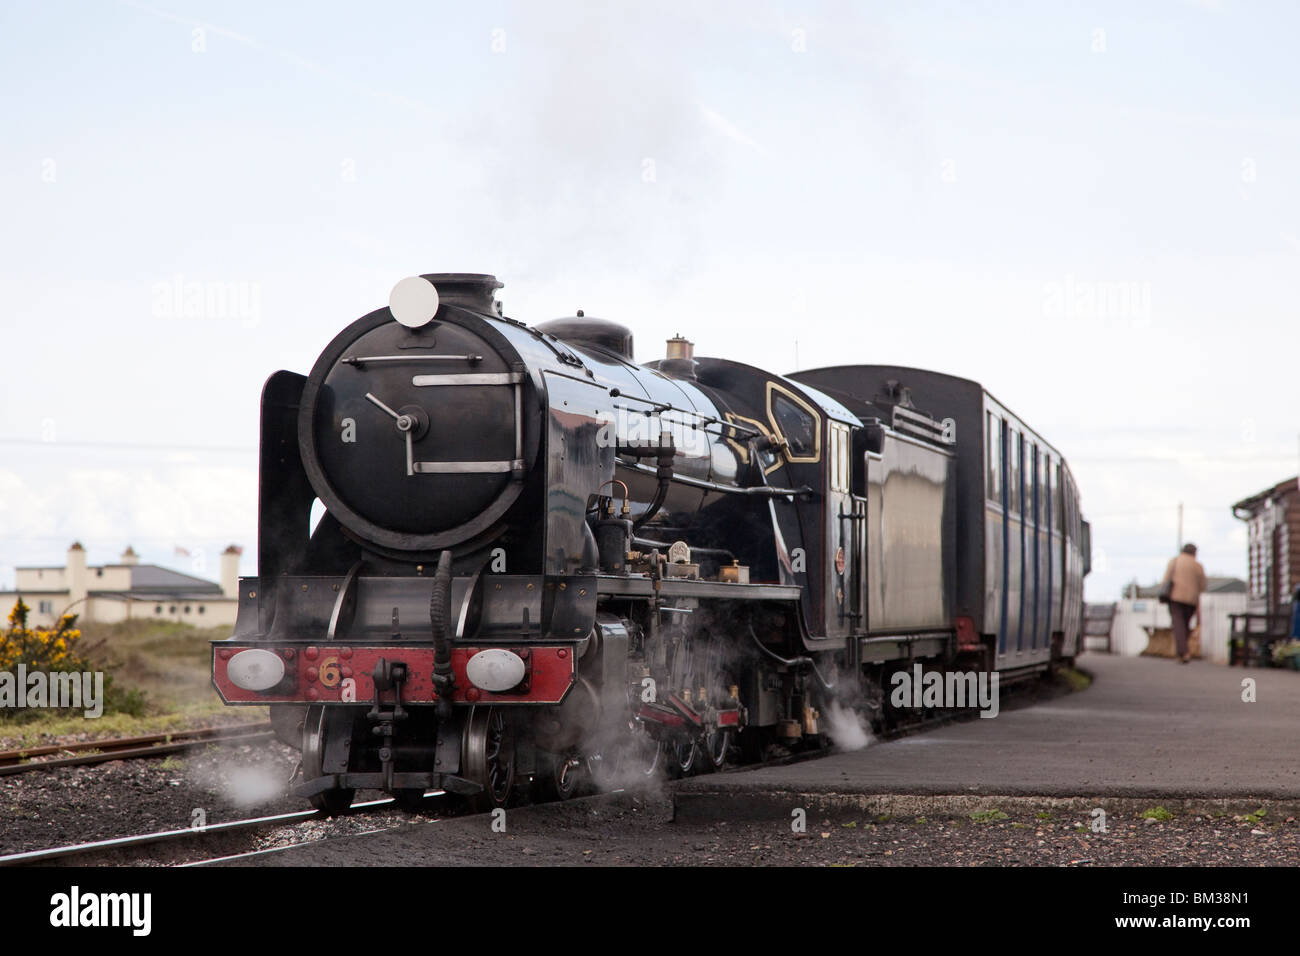 Third scale mountain class steam locomotive 'Samson' at Dungerness Station on the Romney, Hythe, and Dymchurch Railway, Kent, UK Stock Photo